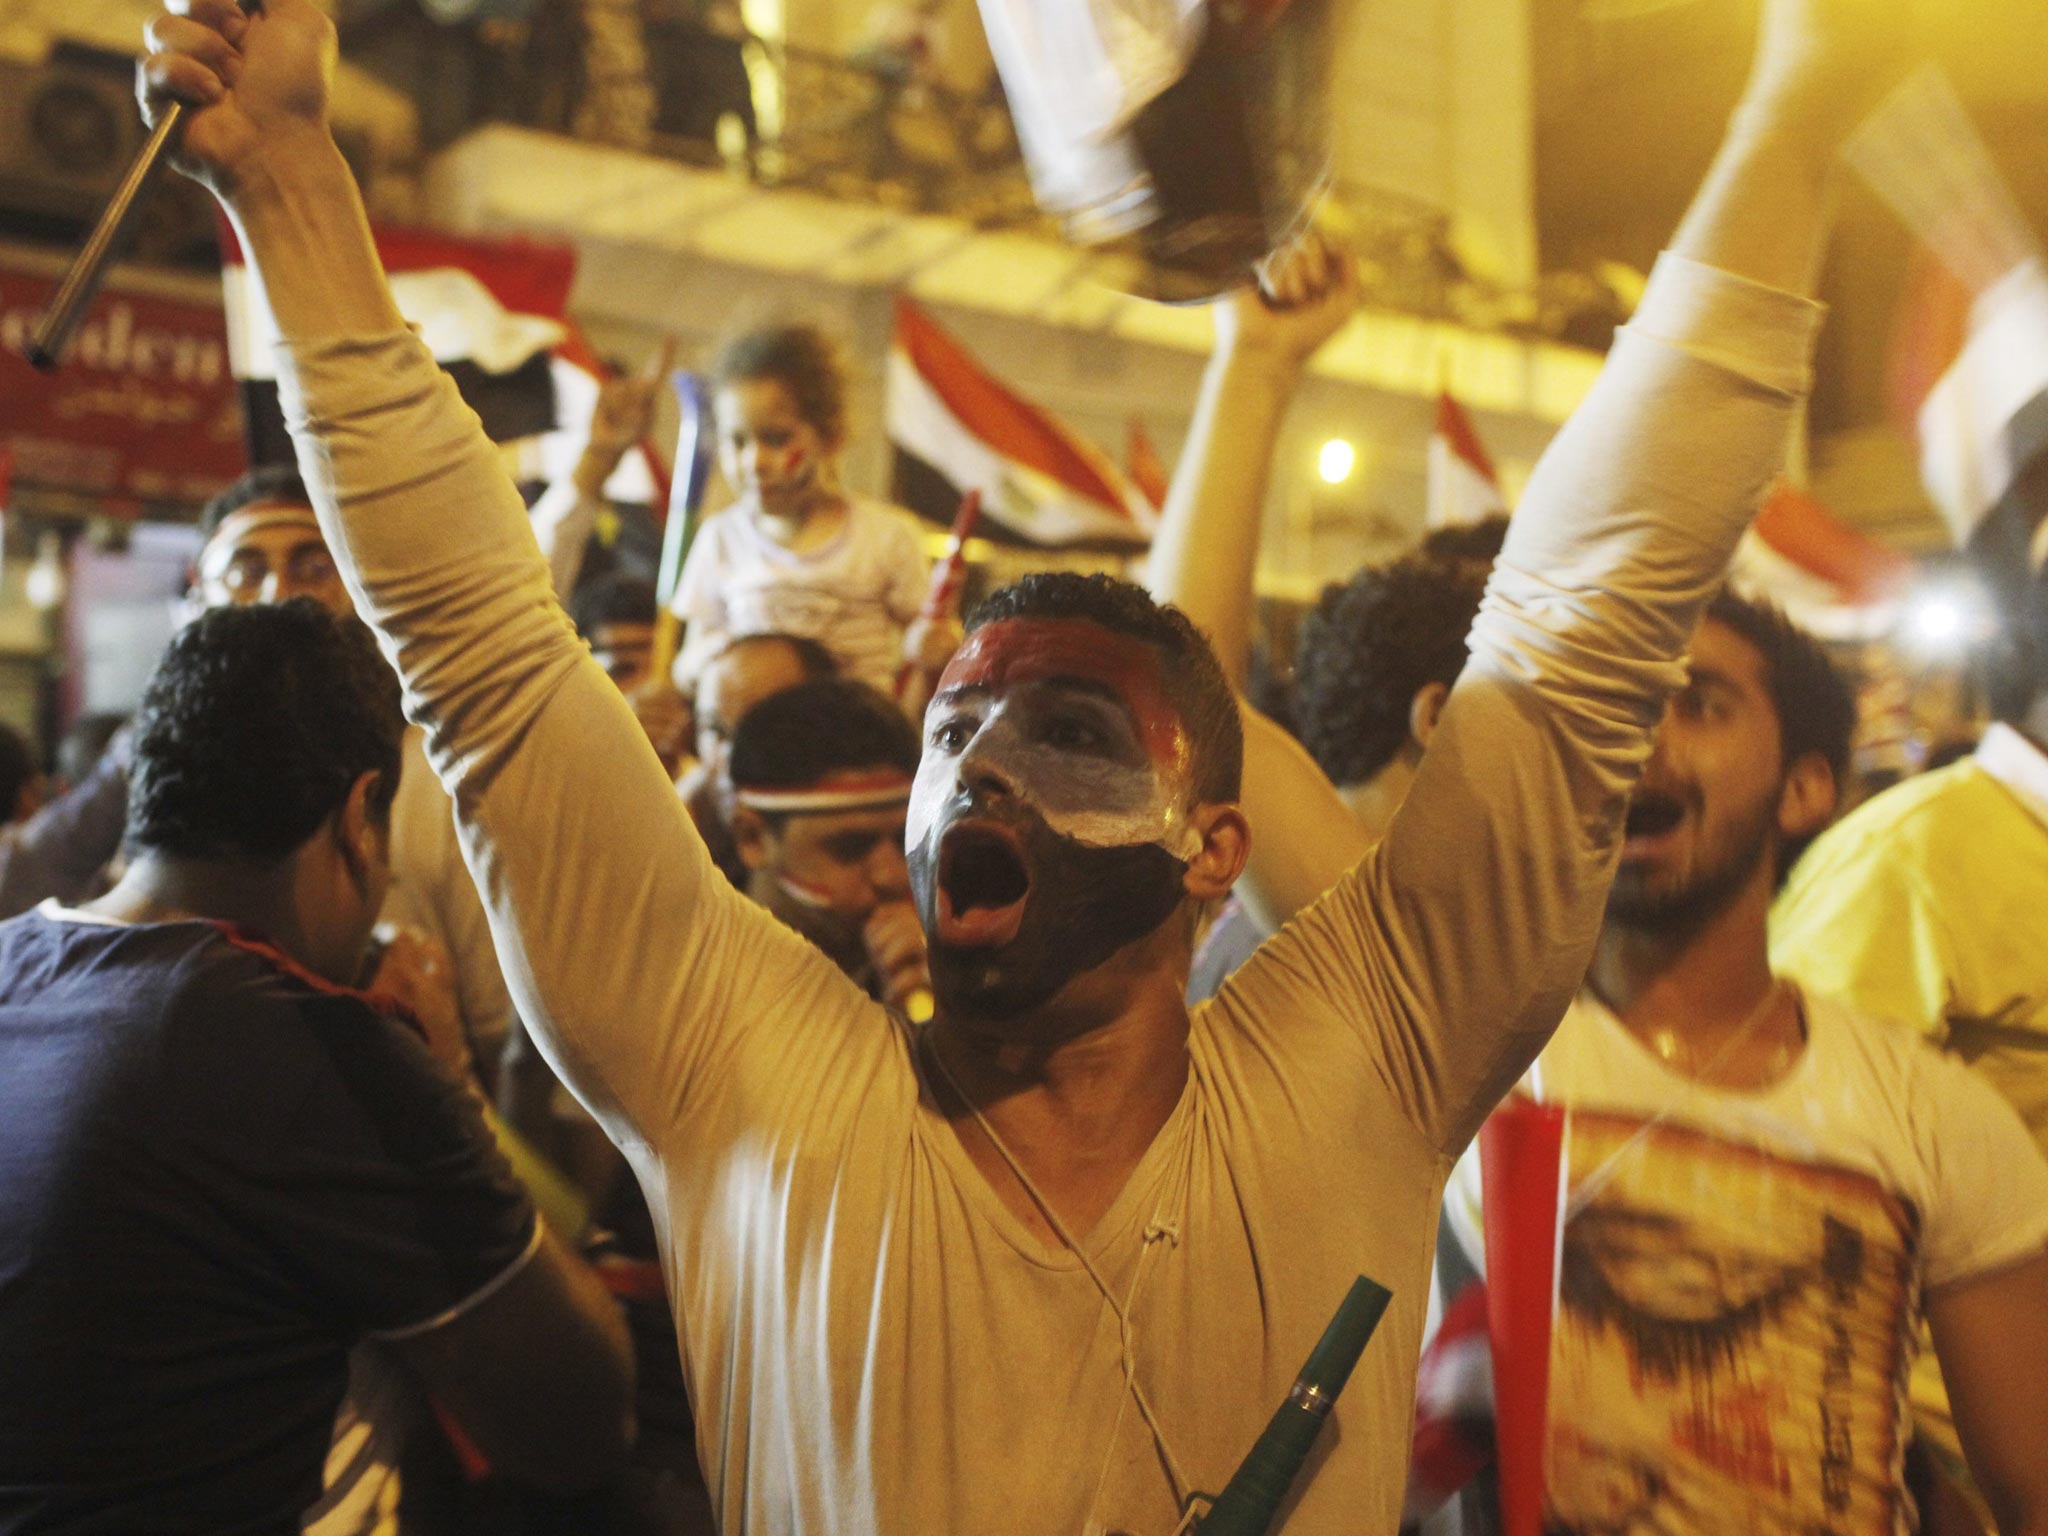 Anti-Morsi protesters chant as they celebrate near Tahrir square in Cairo after the announcement that Egypt's President Mohamed Morsi has been removed